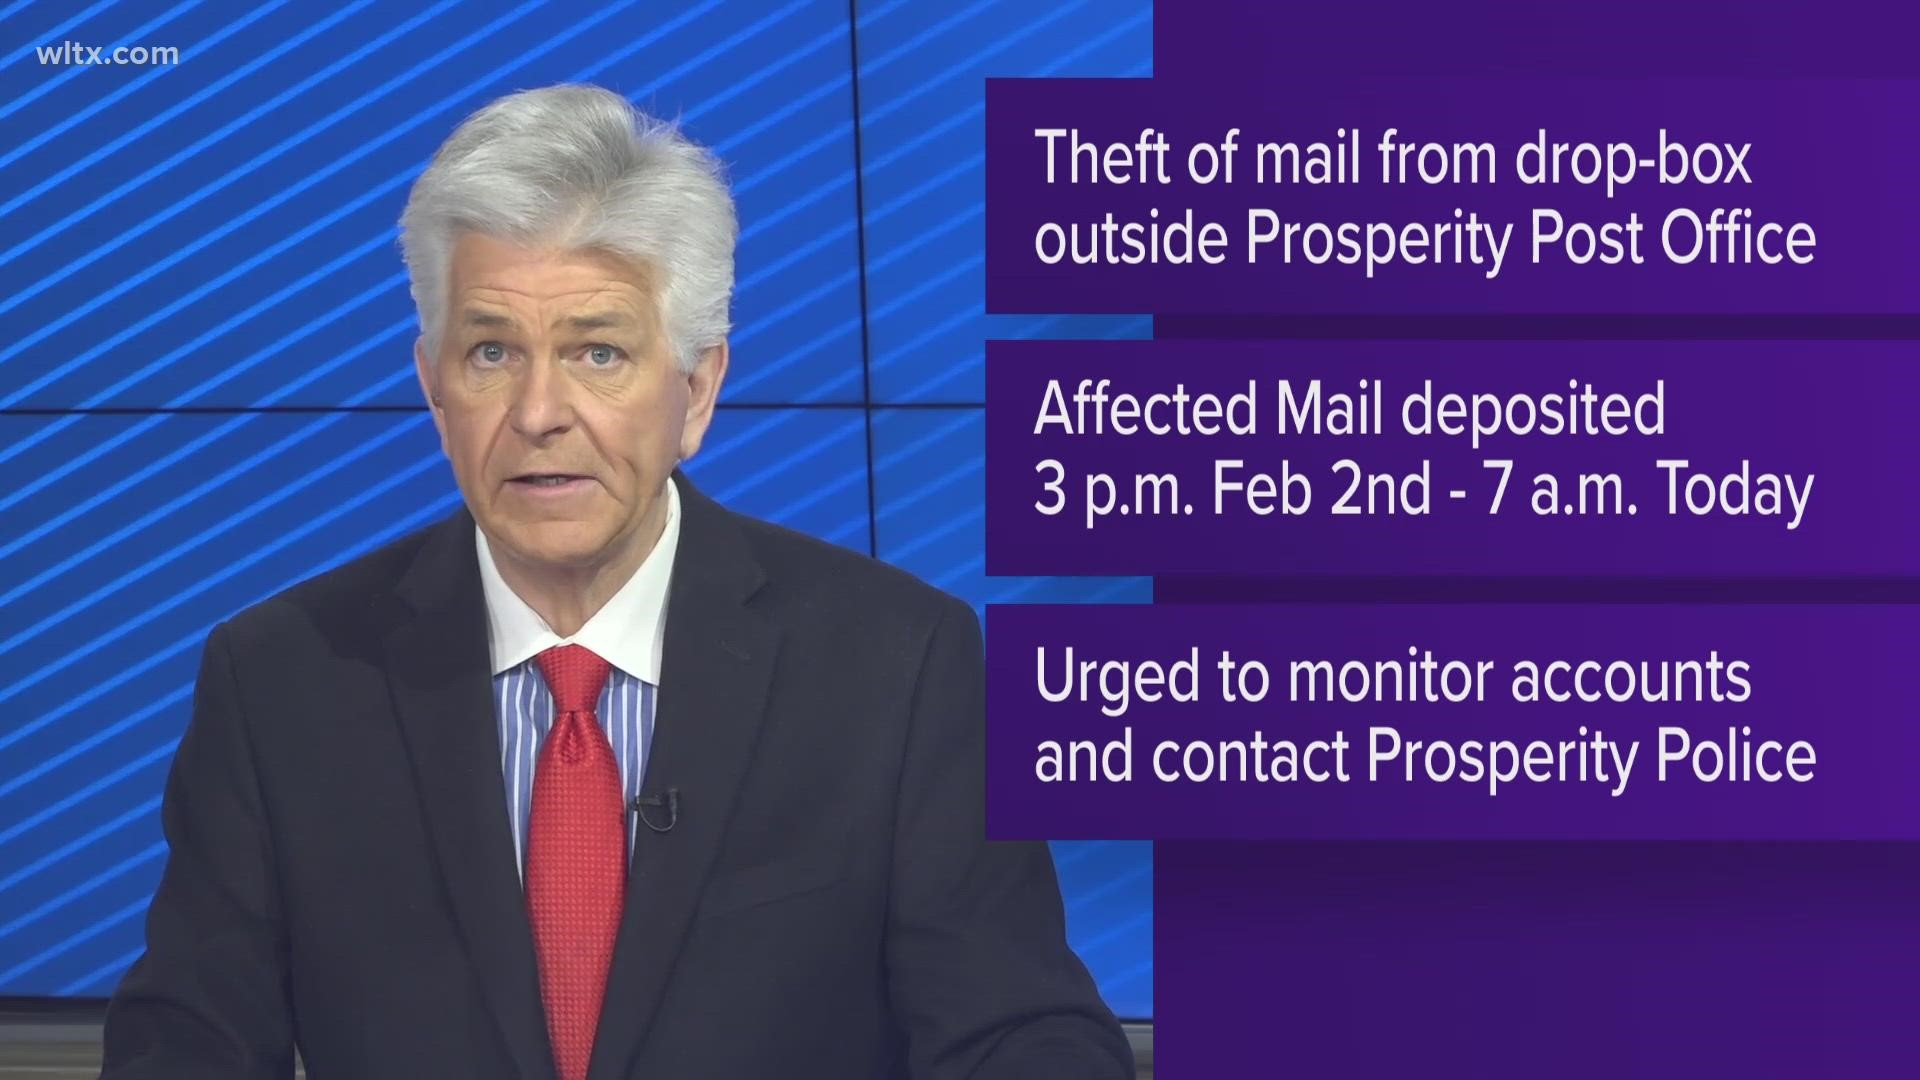 Mail has been stolen  from the outside drop-box at the Prosperity Post Office.